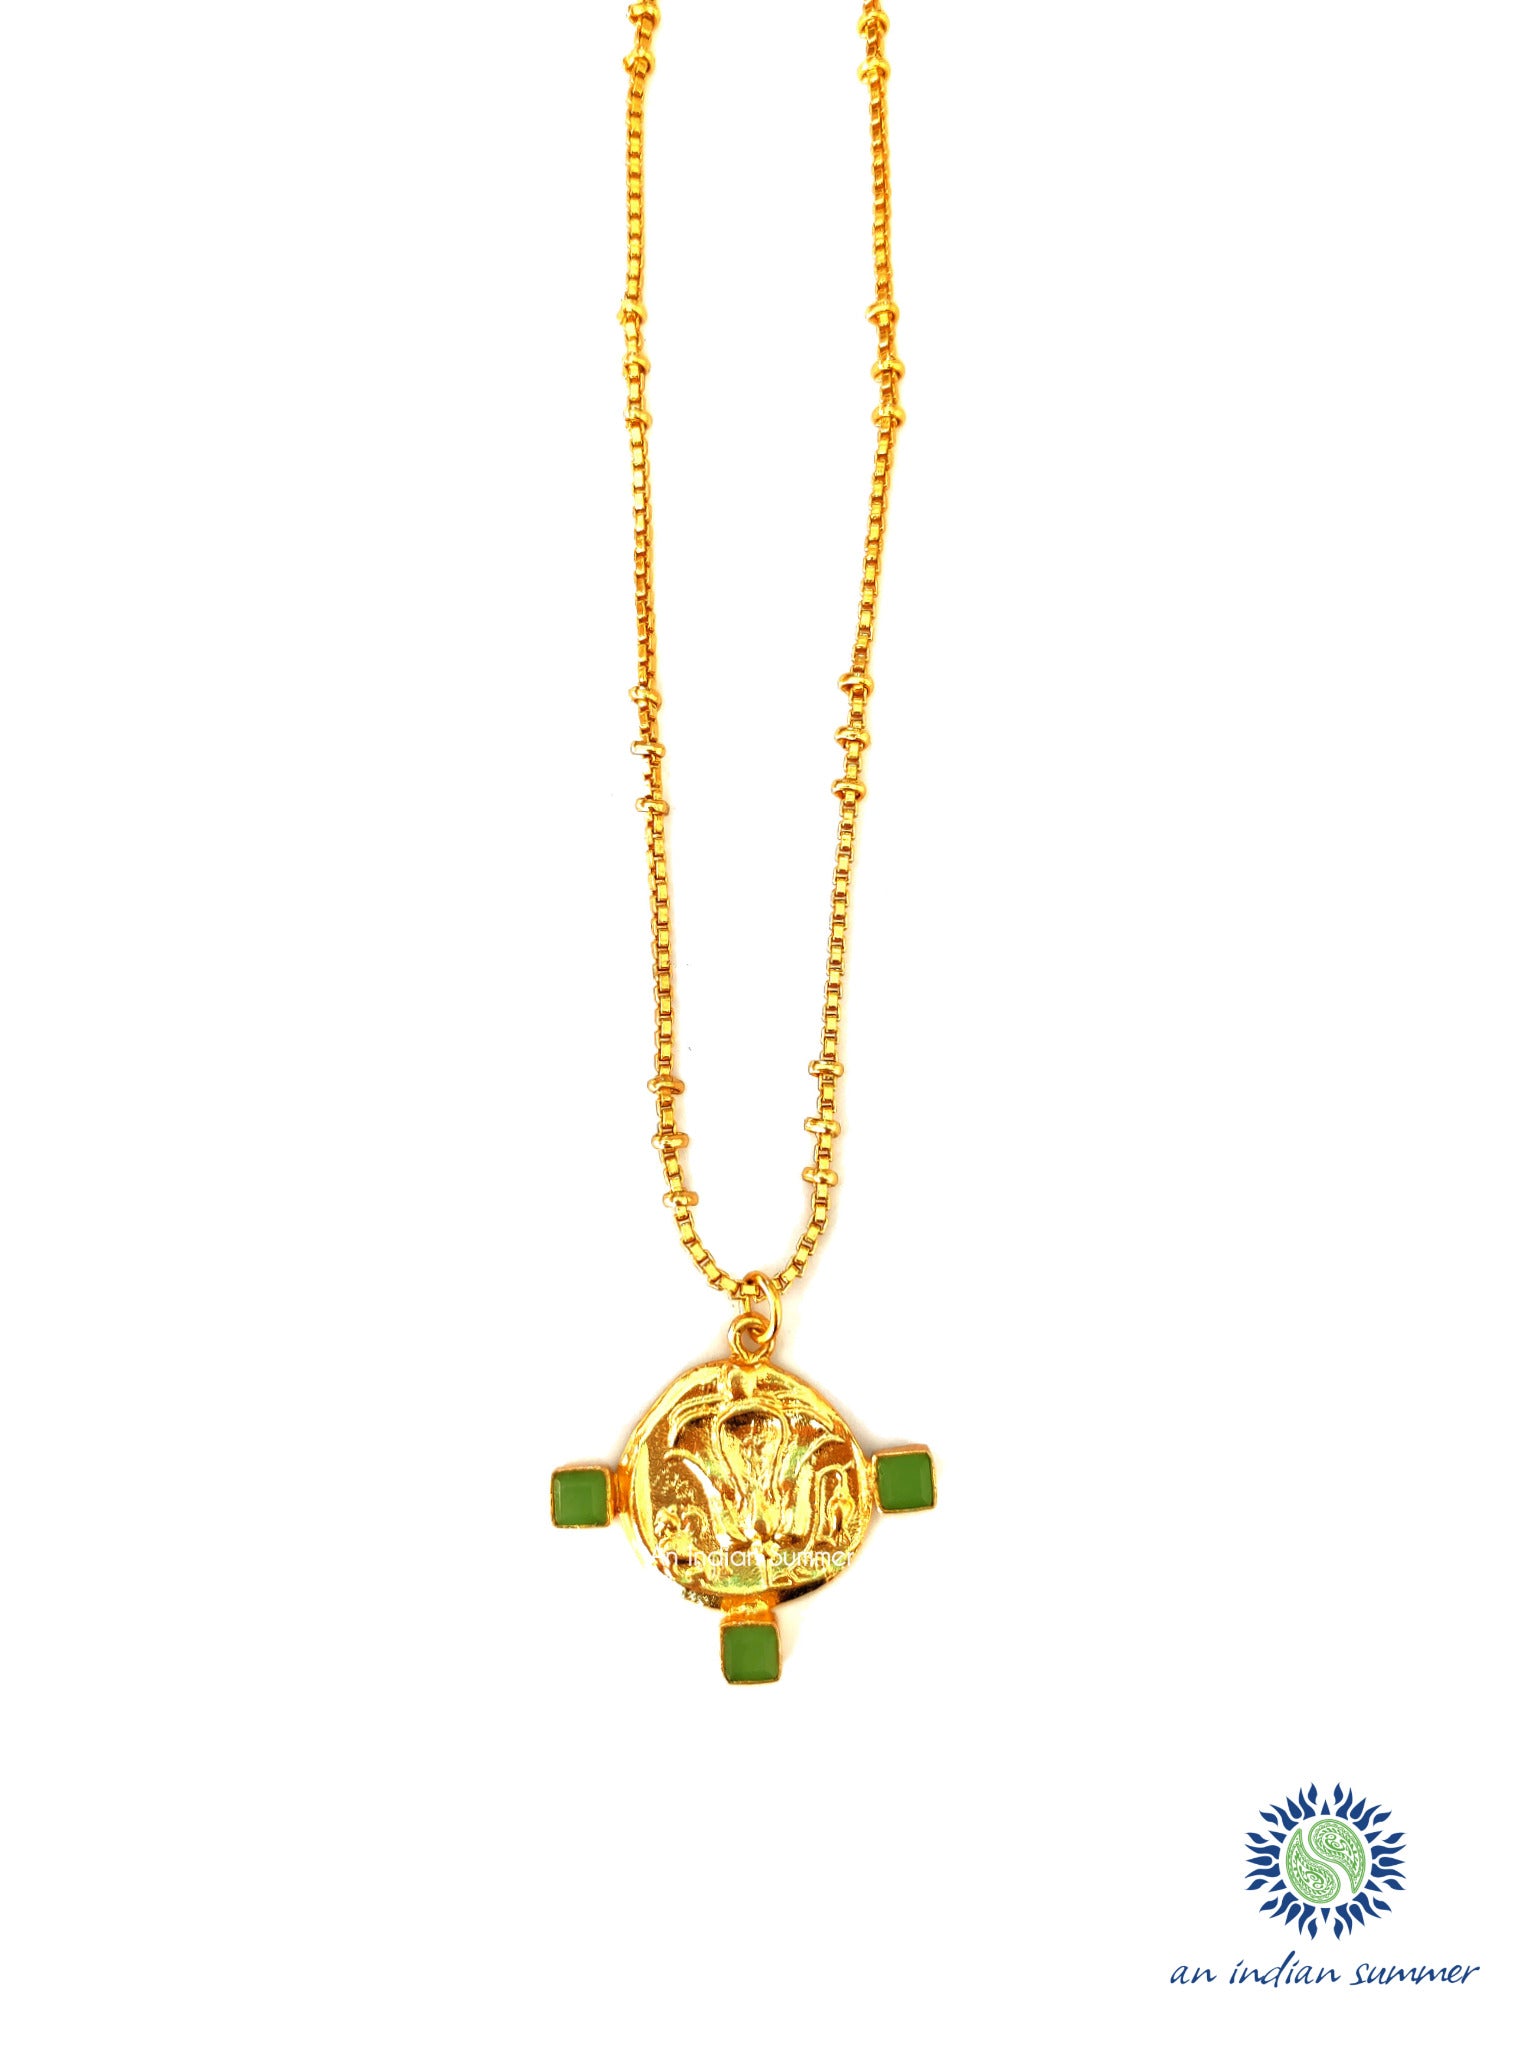 Talisman Medal Necklace - Lotus | Green Jade | 22 Carat Gold Plated Semi Precious Stones | An Indian Summer | Seasonless Timeless Sustainable Ethical Authentic Artisan Conscious Clothing Lifestyle Brand